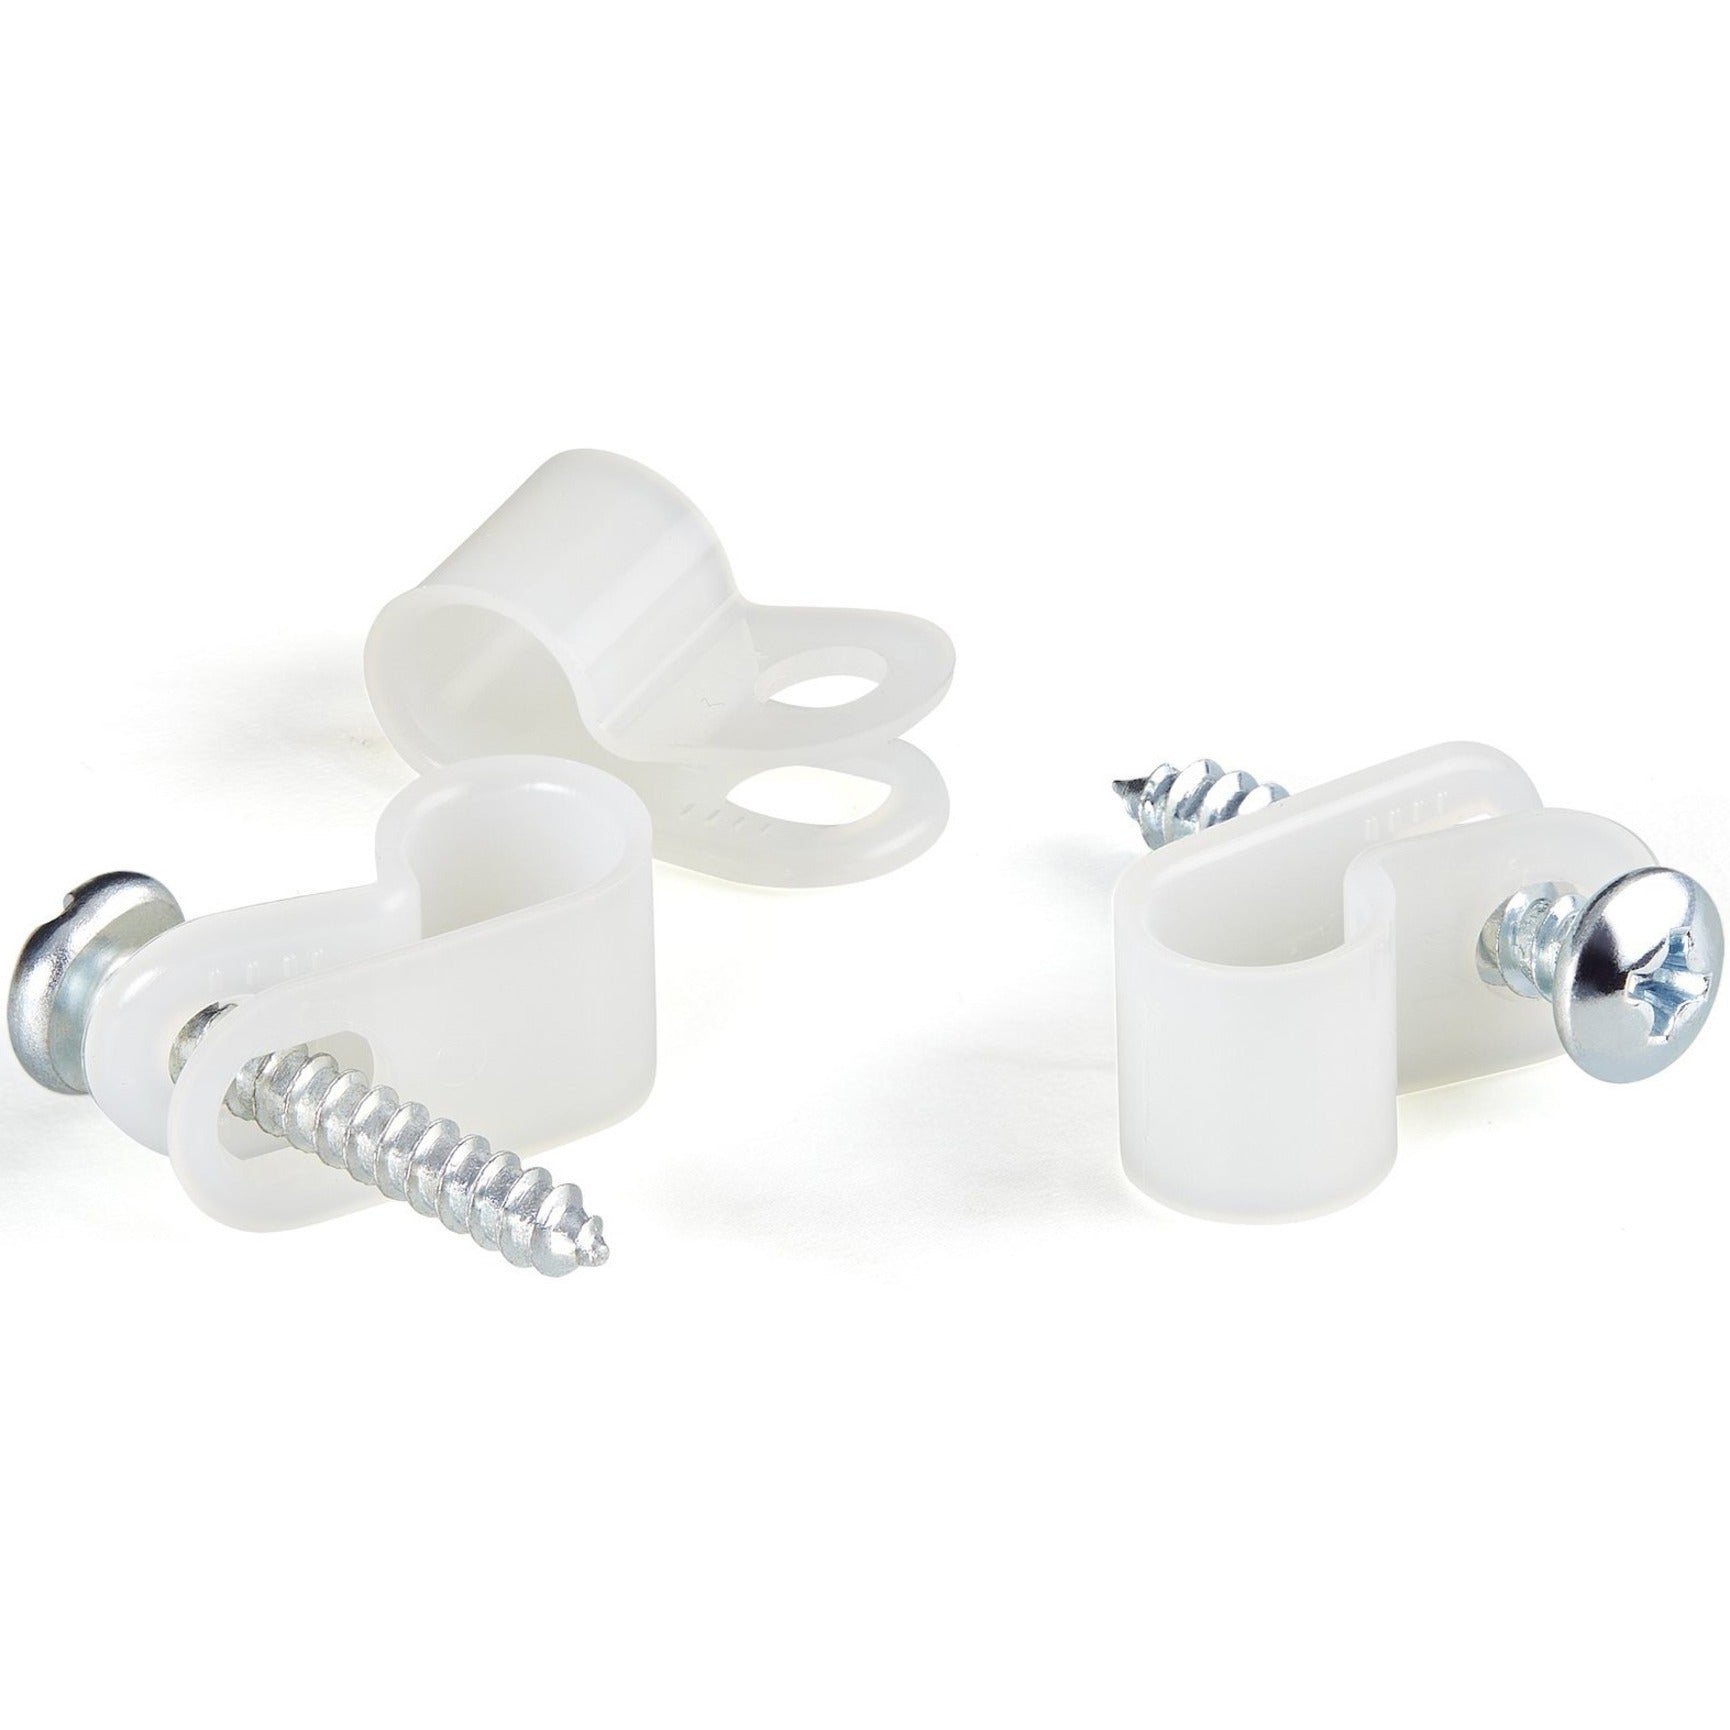 StarTech.com CBMSDCC3 100 - Screw Mount Cable Clamps, TAA Compliant, 2 Year Warranty, White